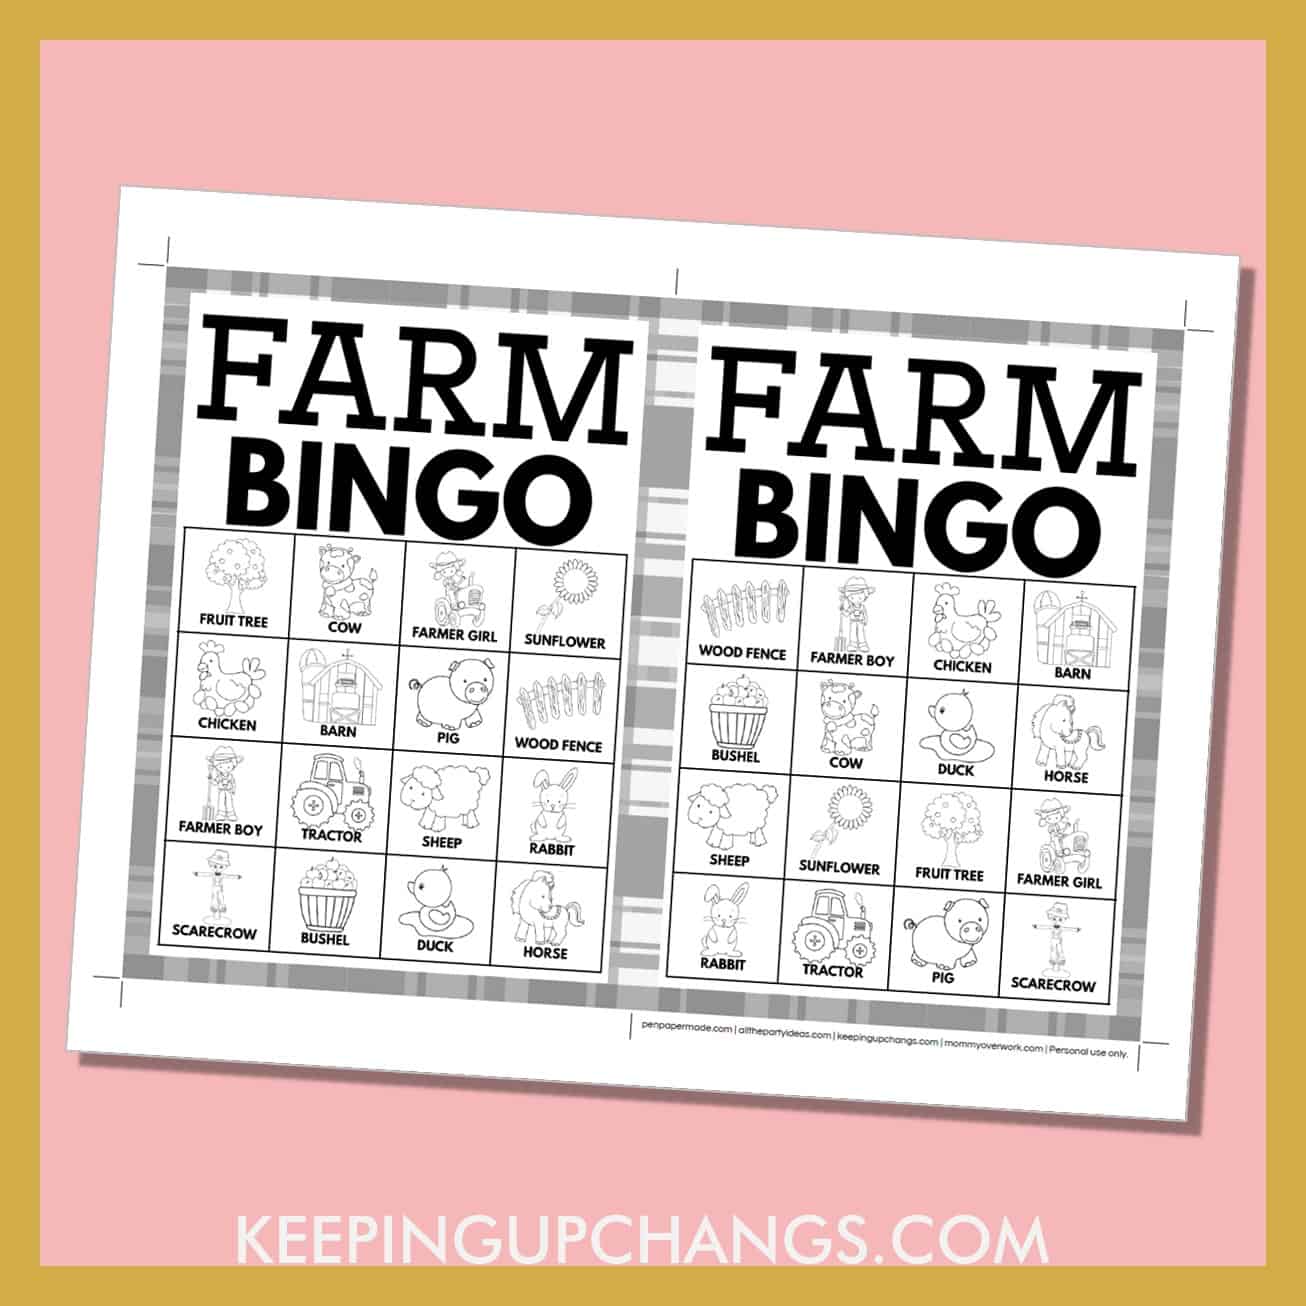 free farm bingo card 4x4 5x7 game boards with black, white images and text words.